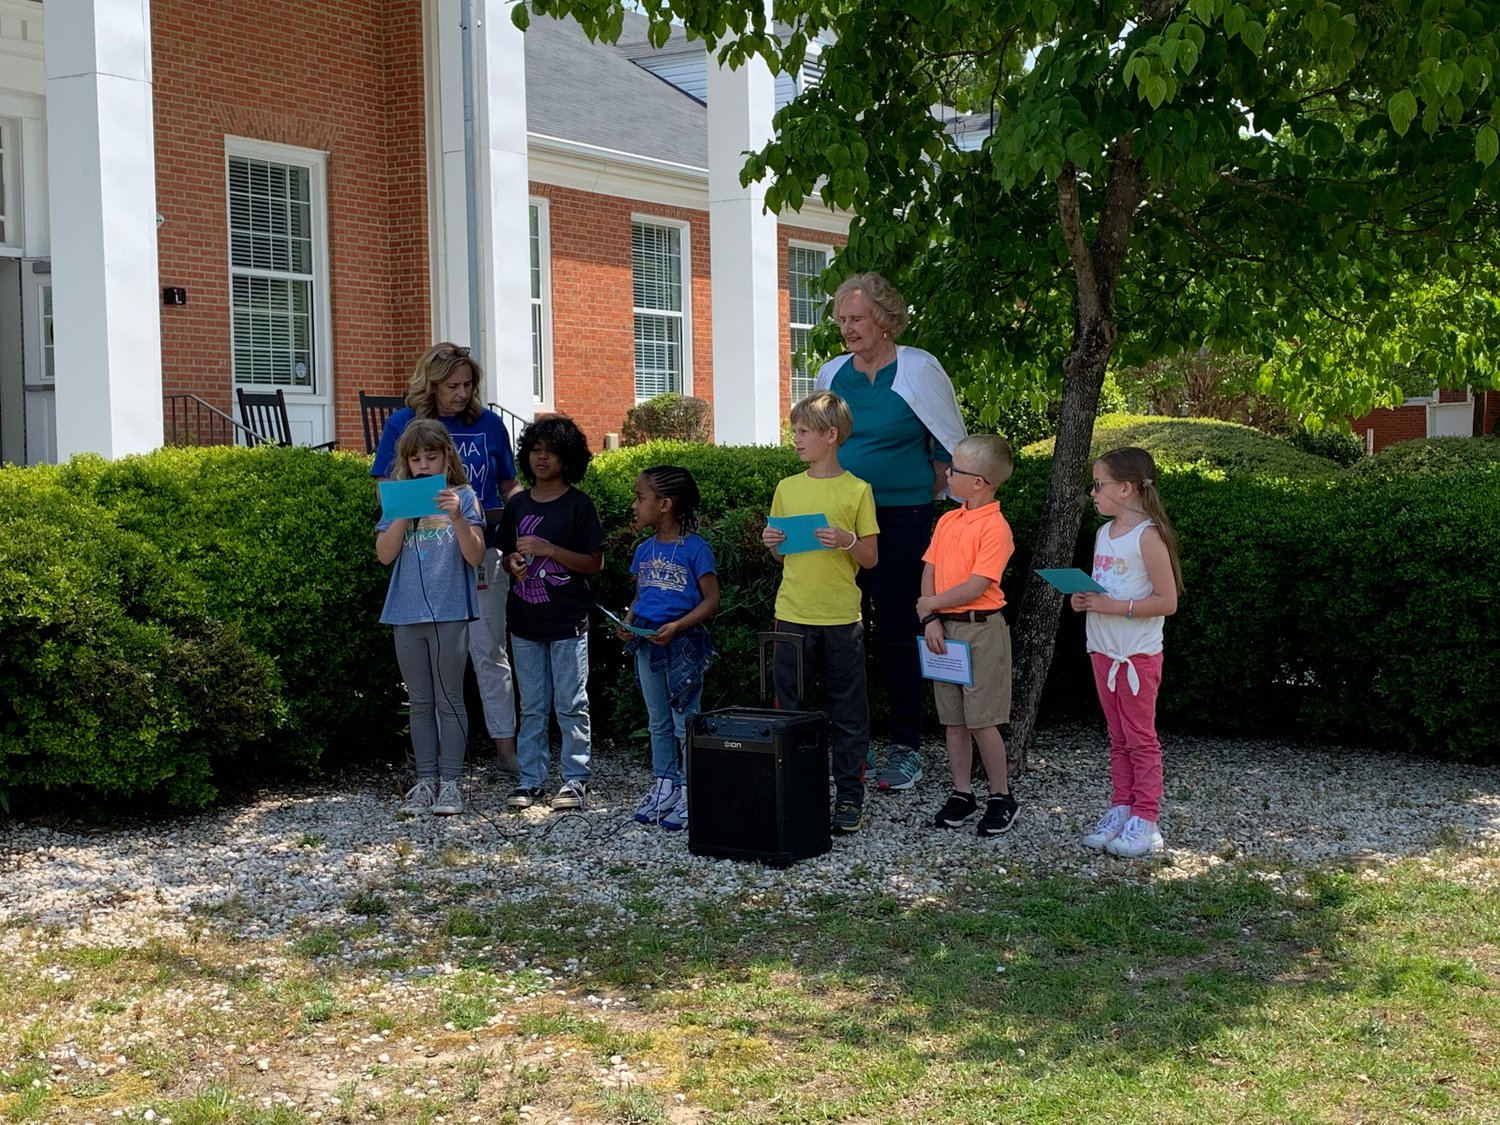 First-graders at Alma Easom Elementary School presented a program April 29 during a tree planting event in observance of Earth Day.